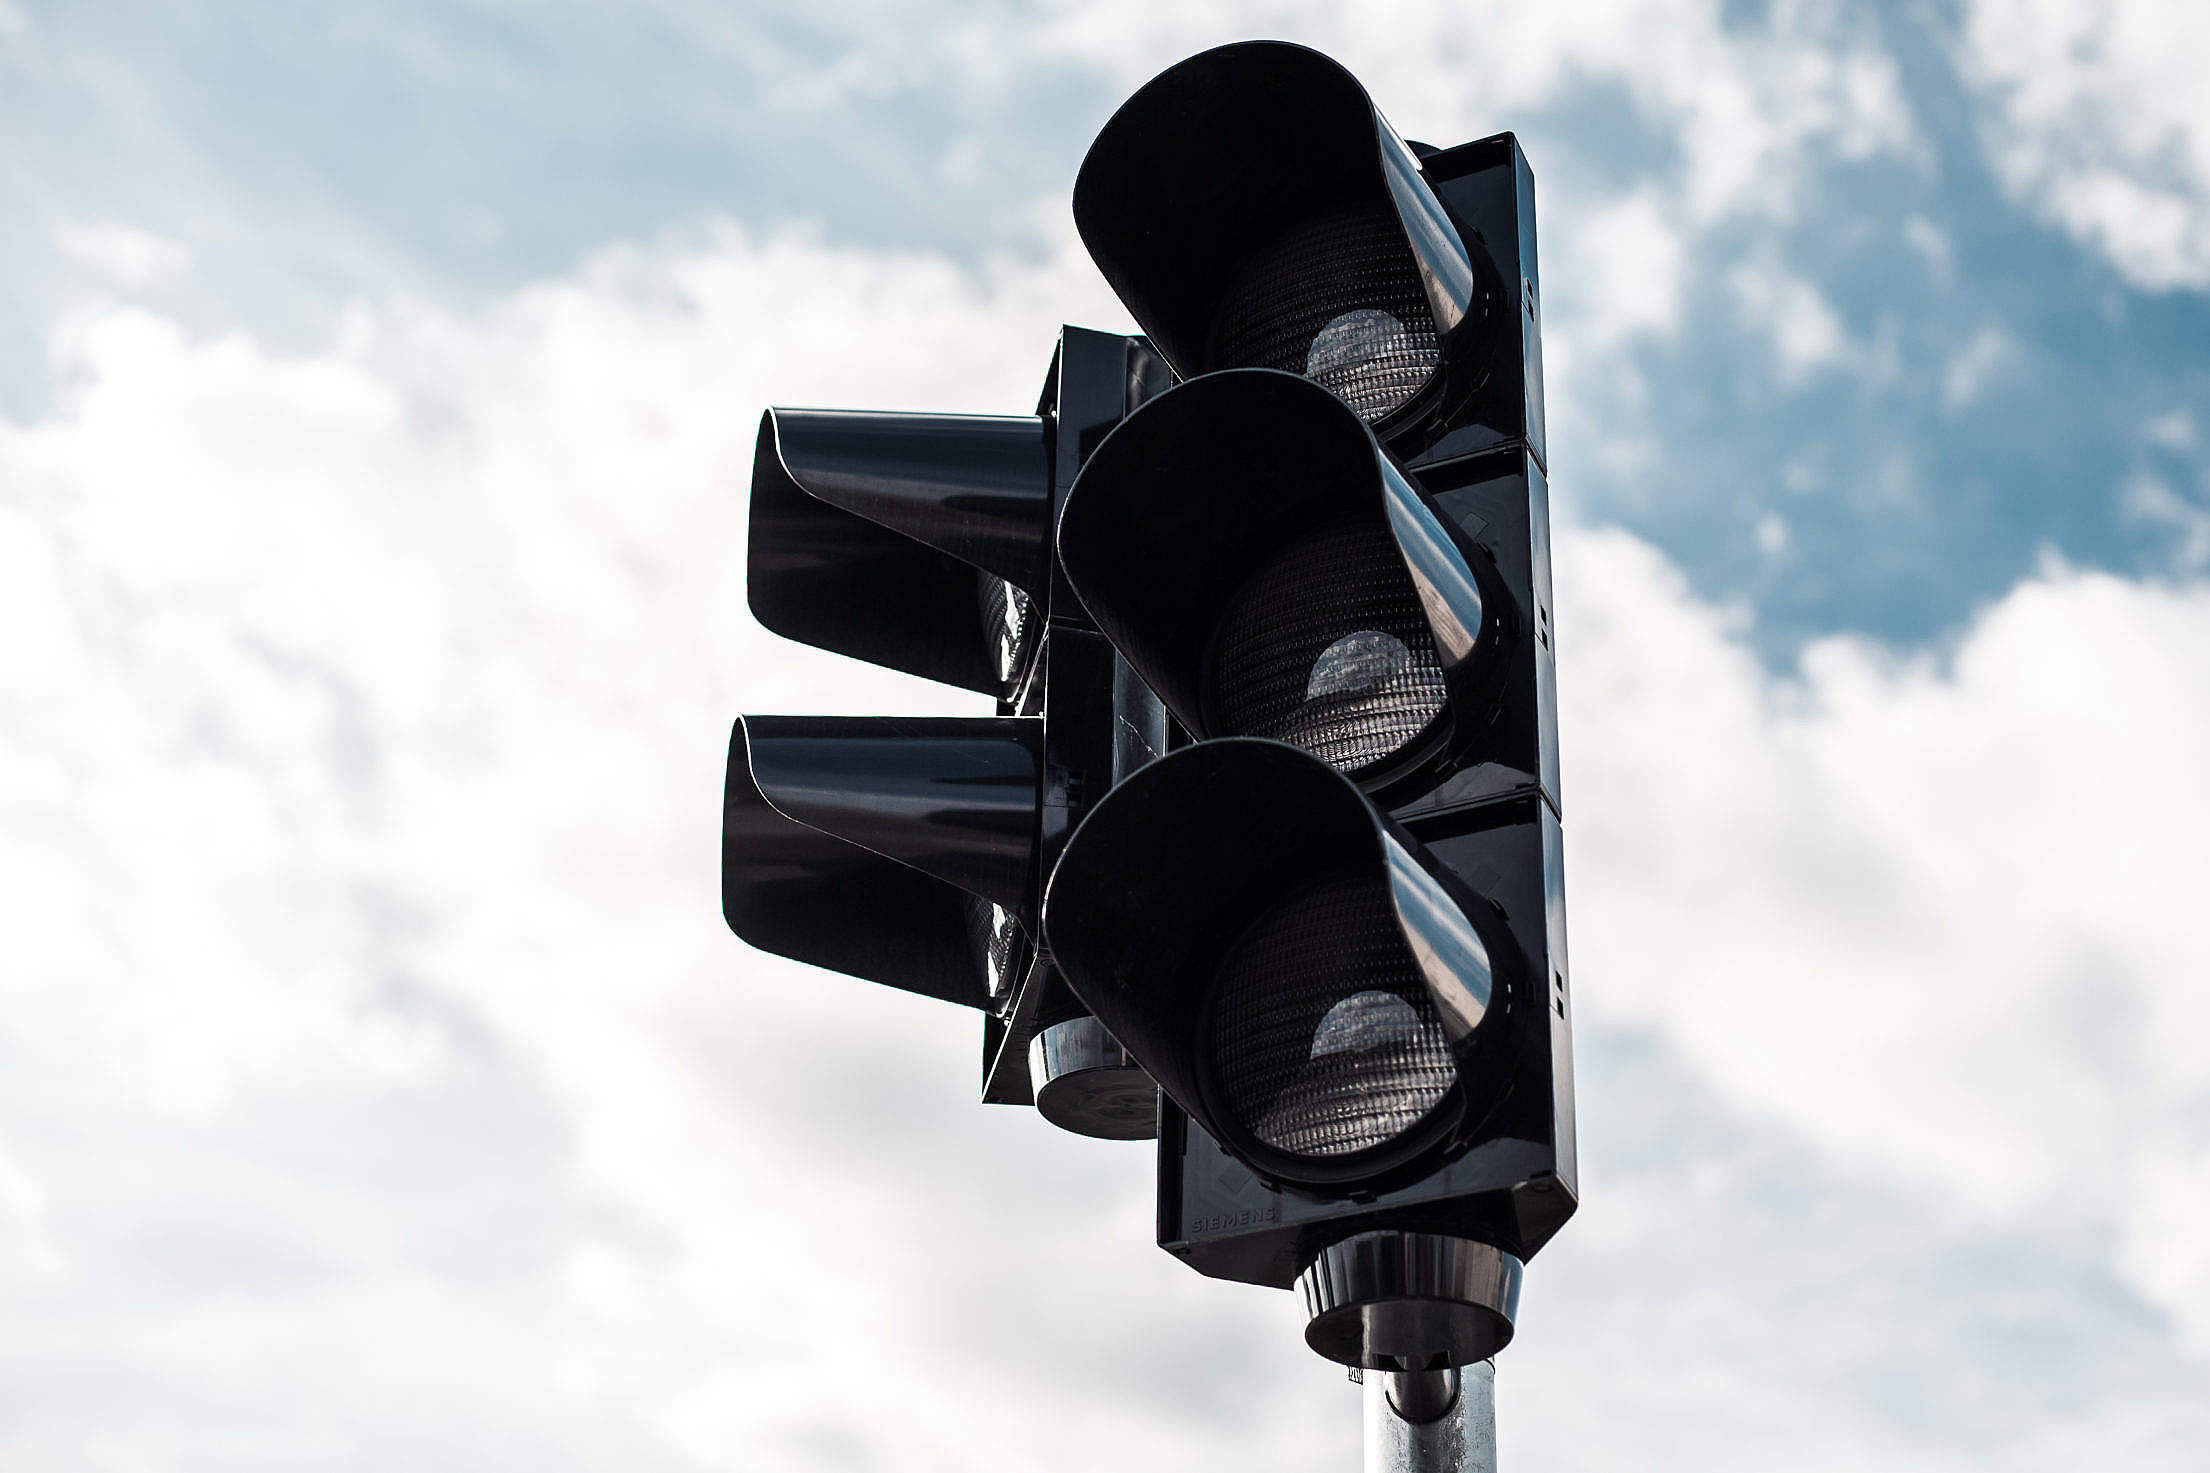 Traffic Lights and Sky With Clouds #2 Free Stock Photo